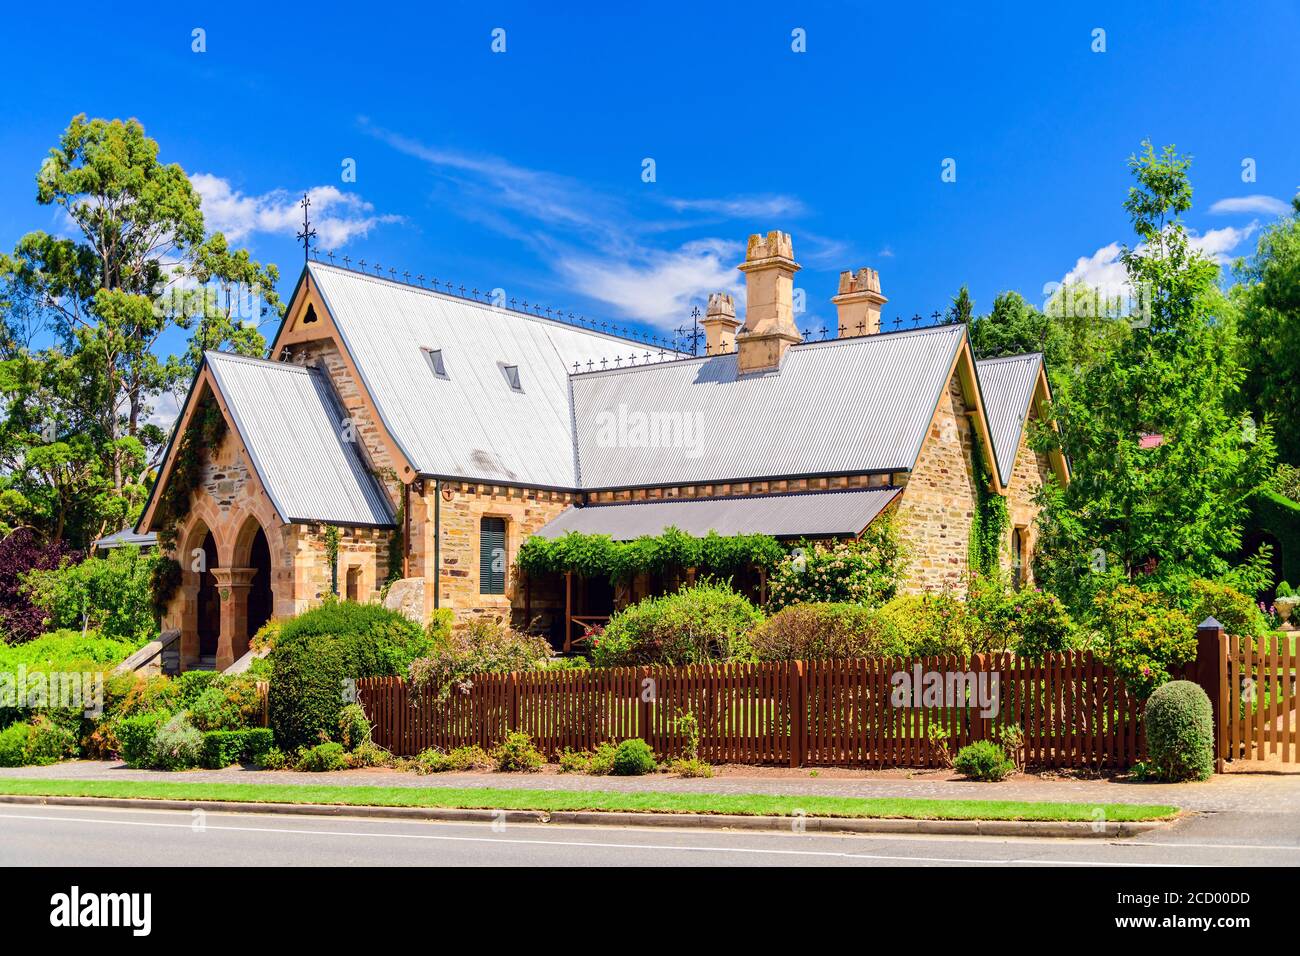 Adelaide Hills, South Australia - February 9, 2020: Former Police Station and Courthouse at Clarendon viewed from the street on a bright day Stock Photo